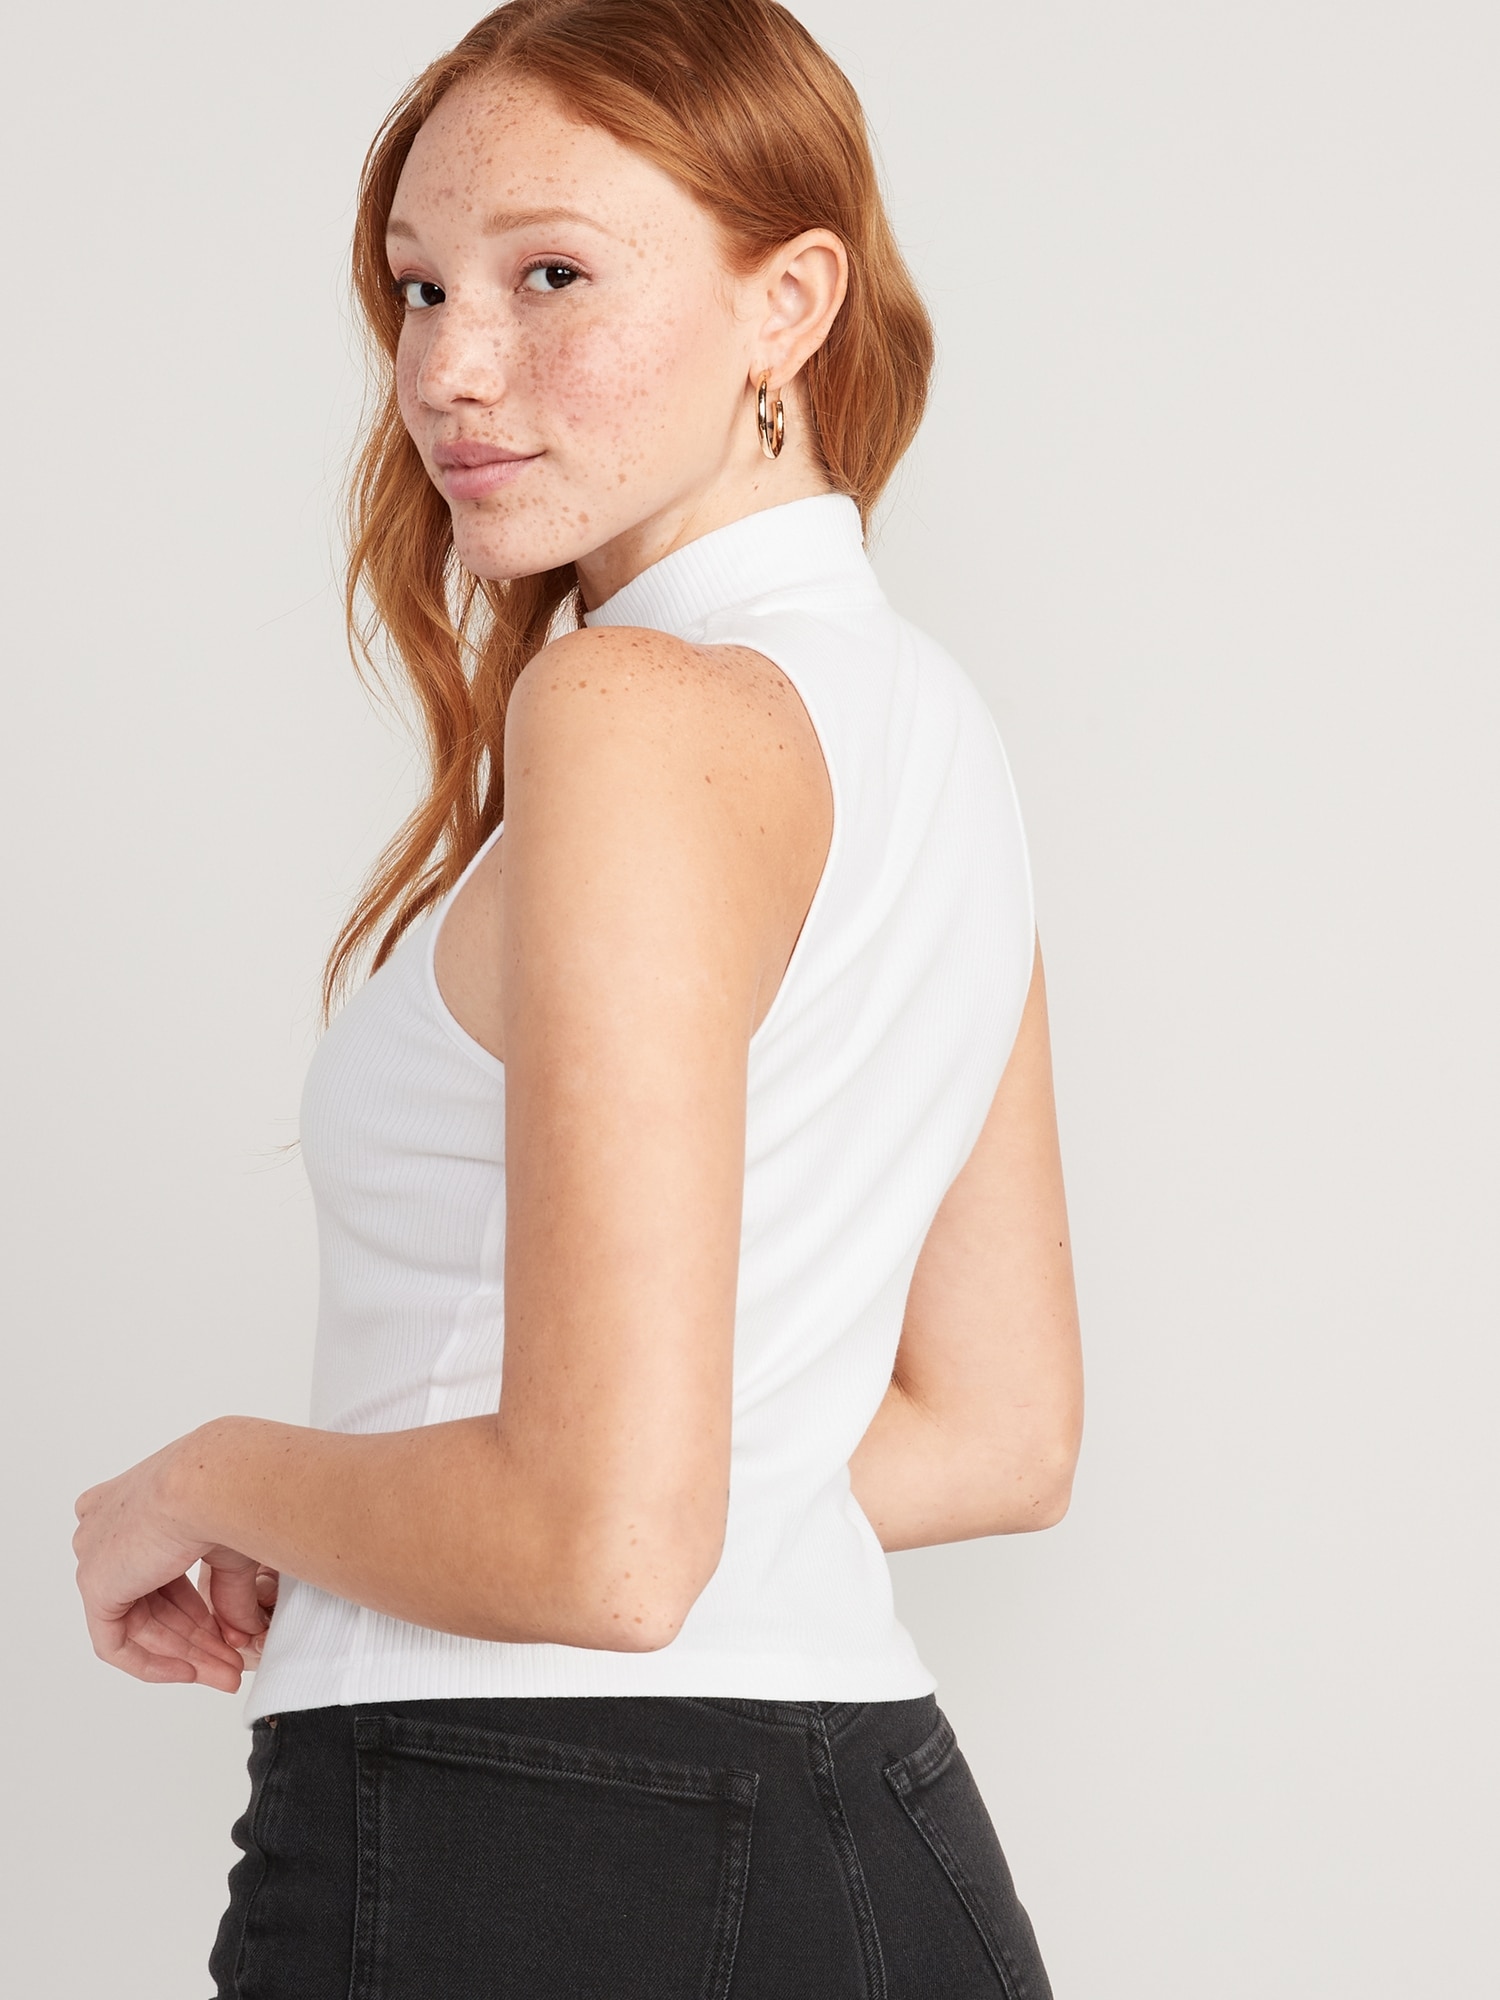 Fitted Sleeveless Mock-Neck Top for Women - Old Navy Philippines